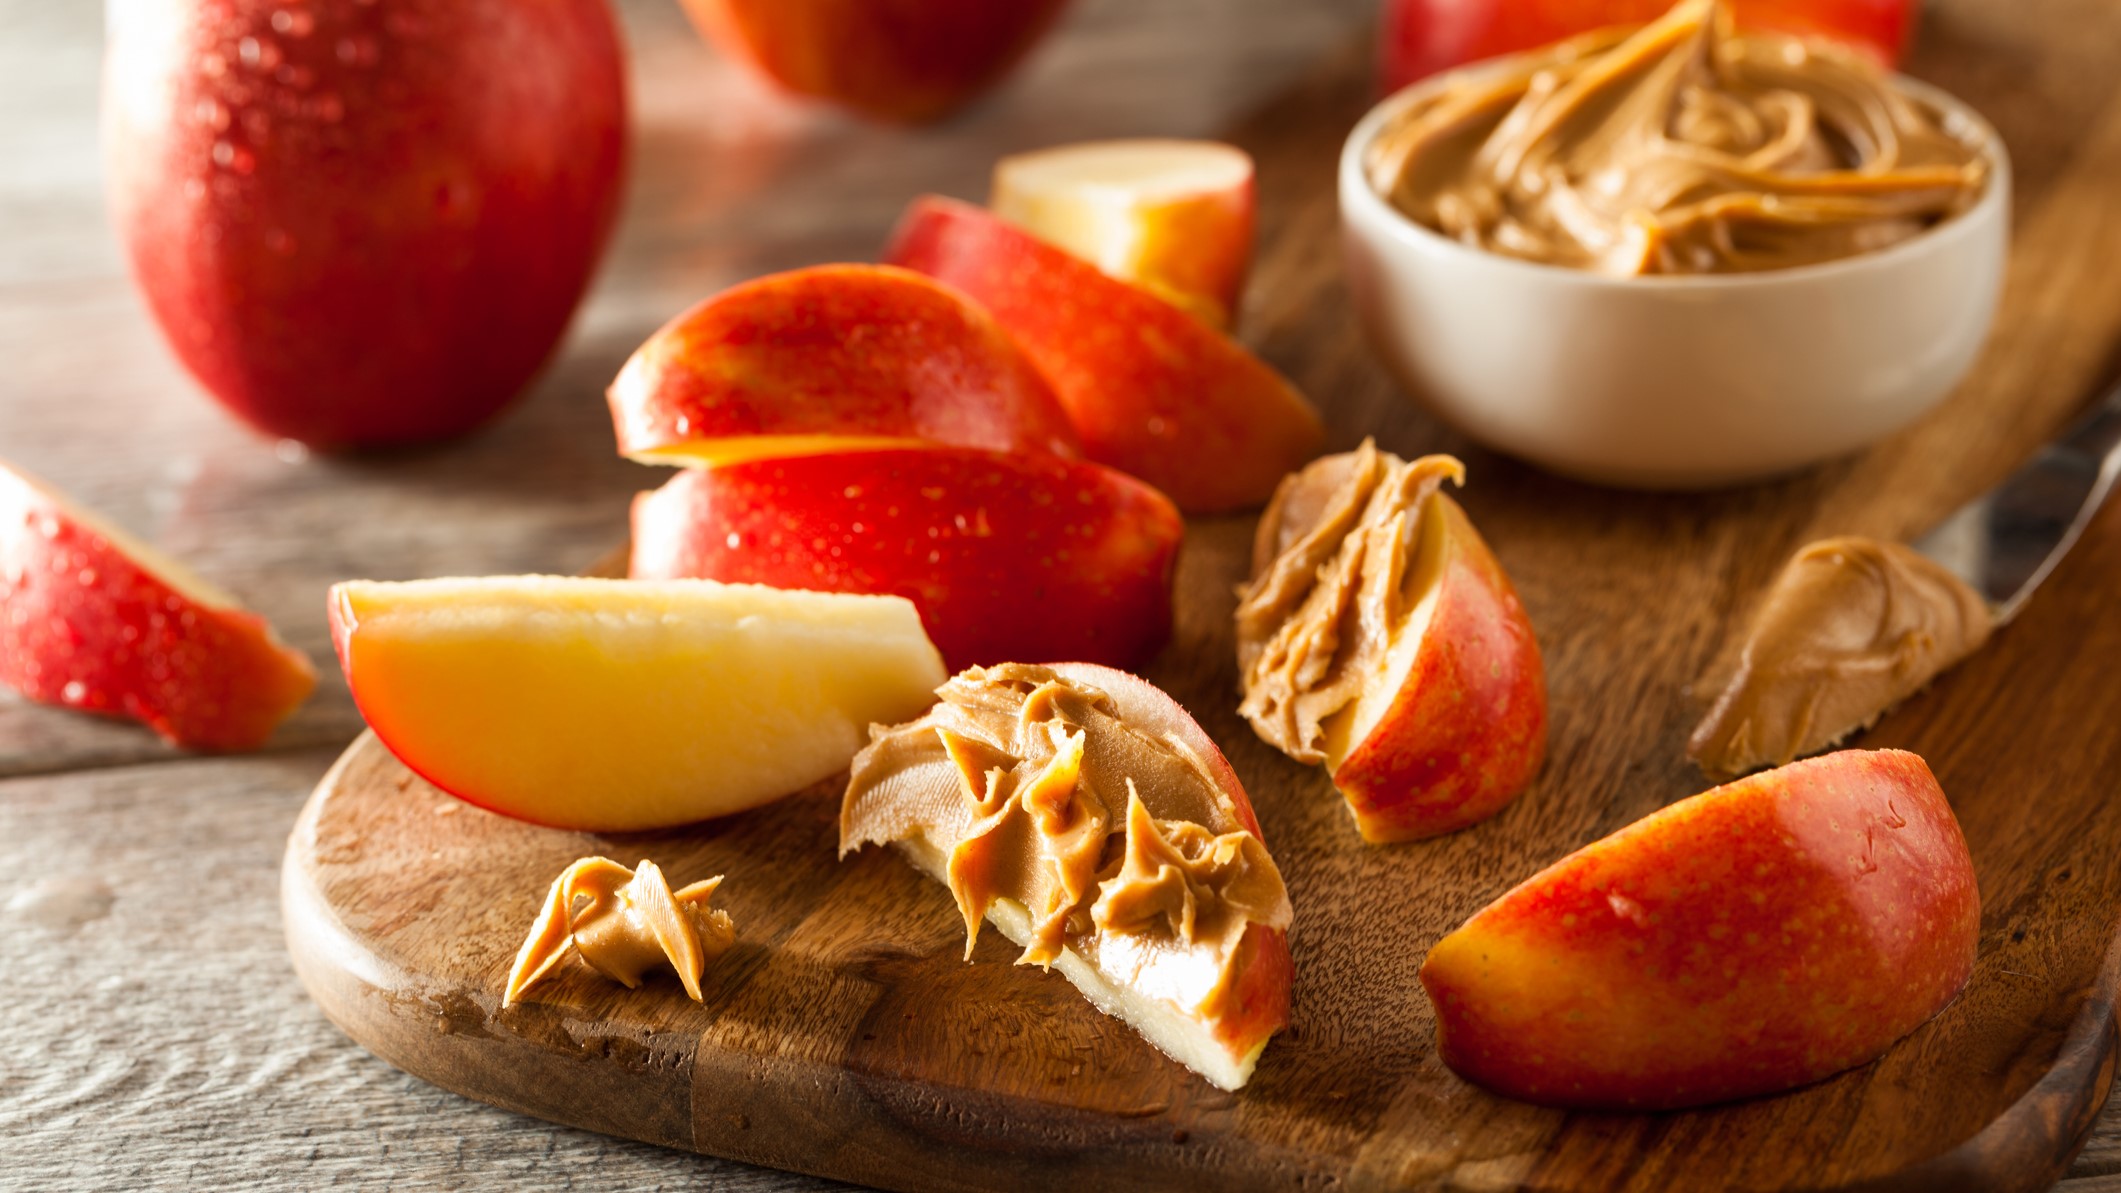 A photo of some apple with peanut butter - a healthy snack idea